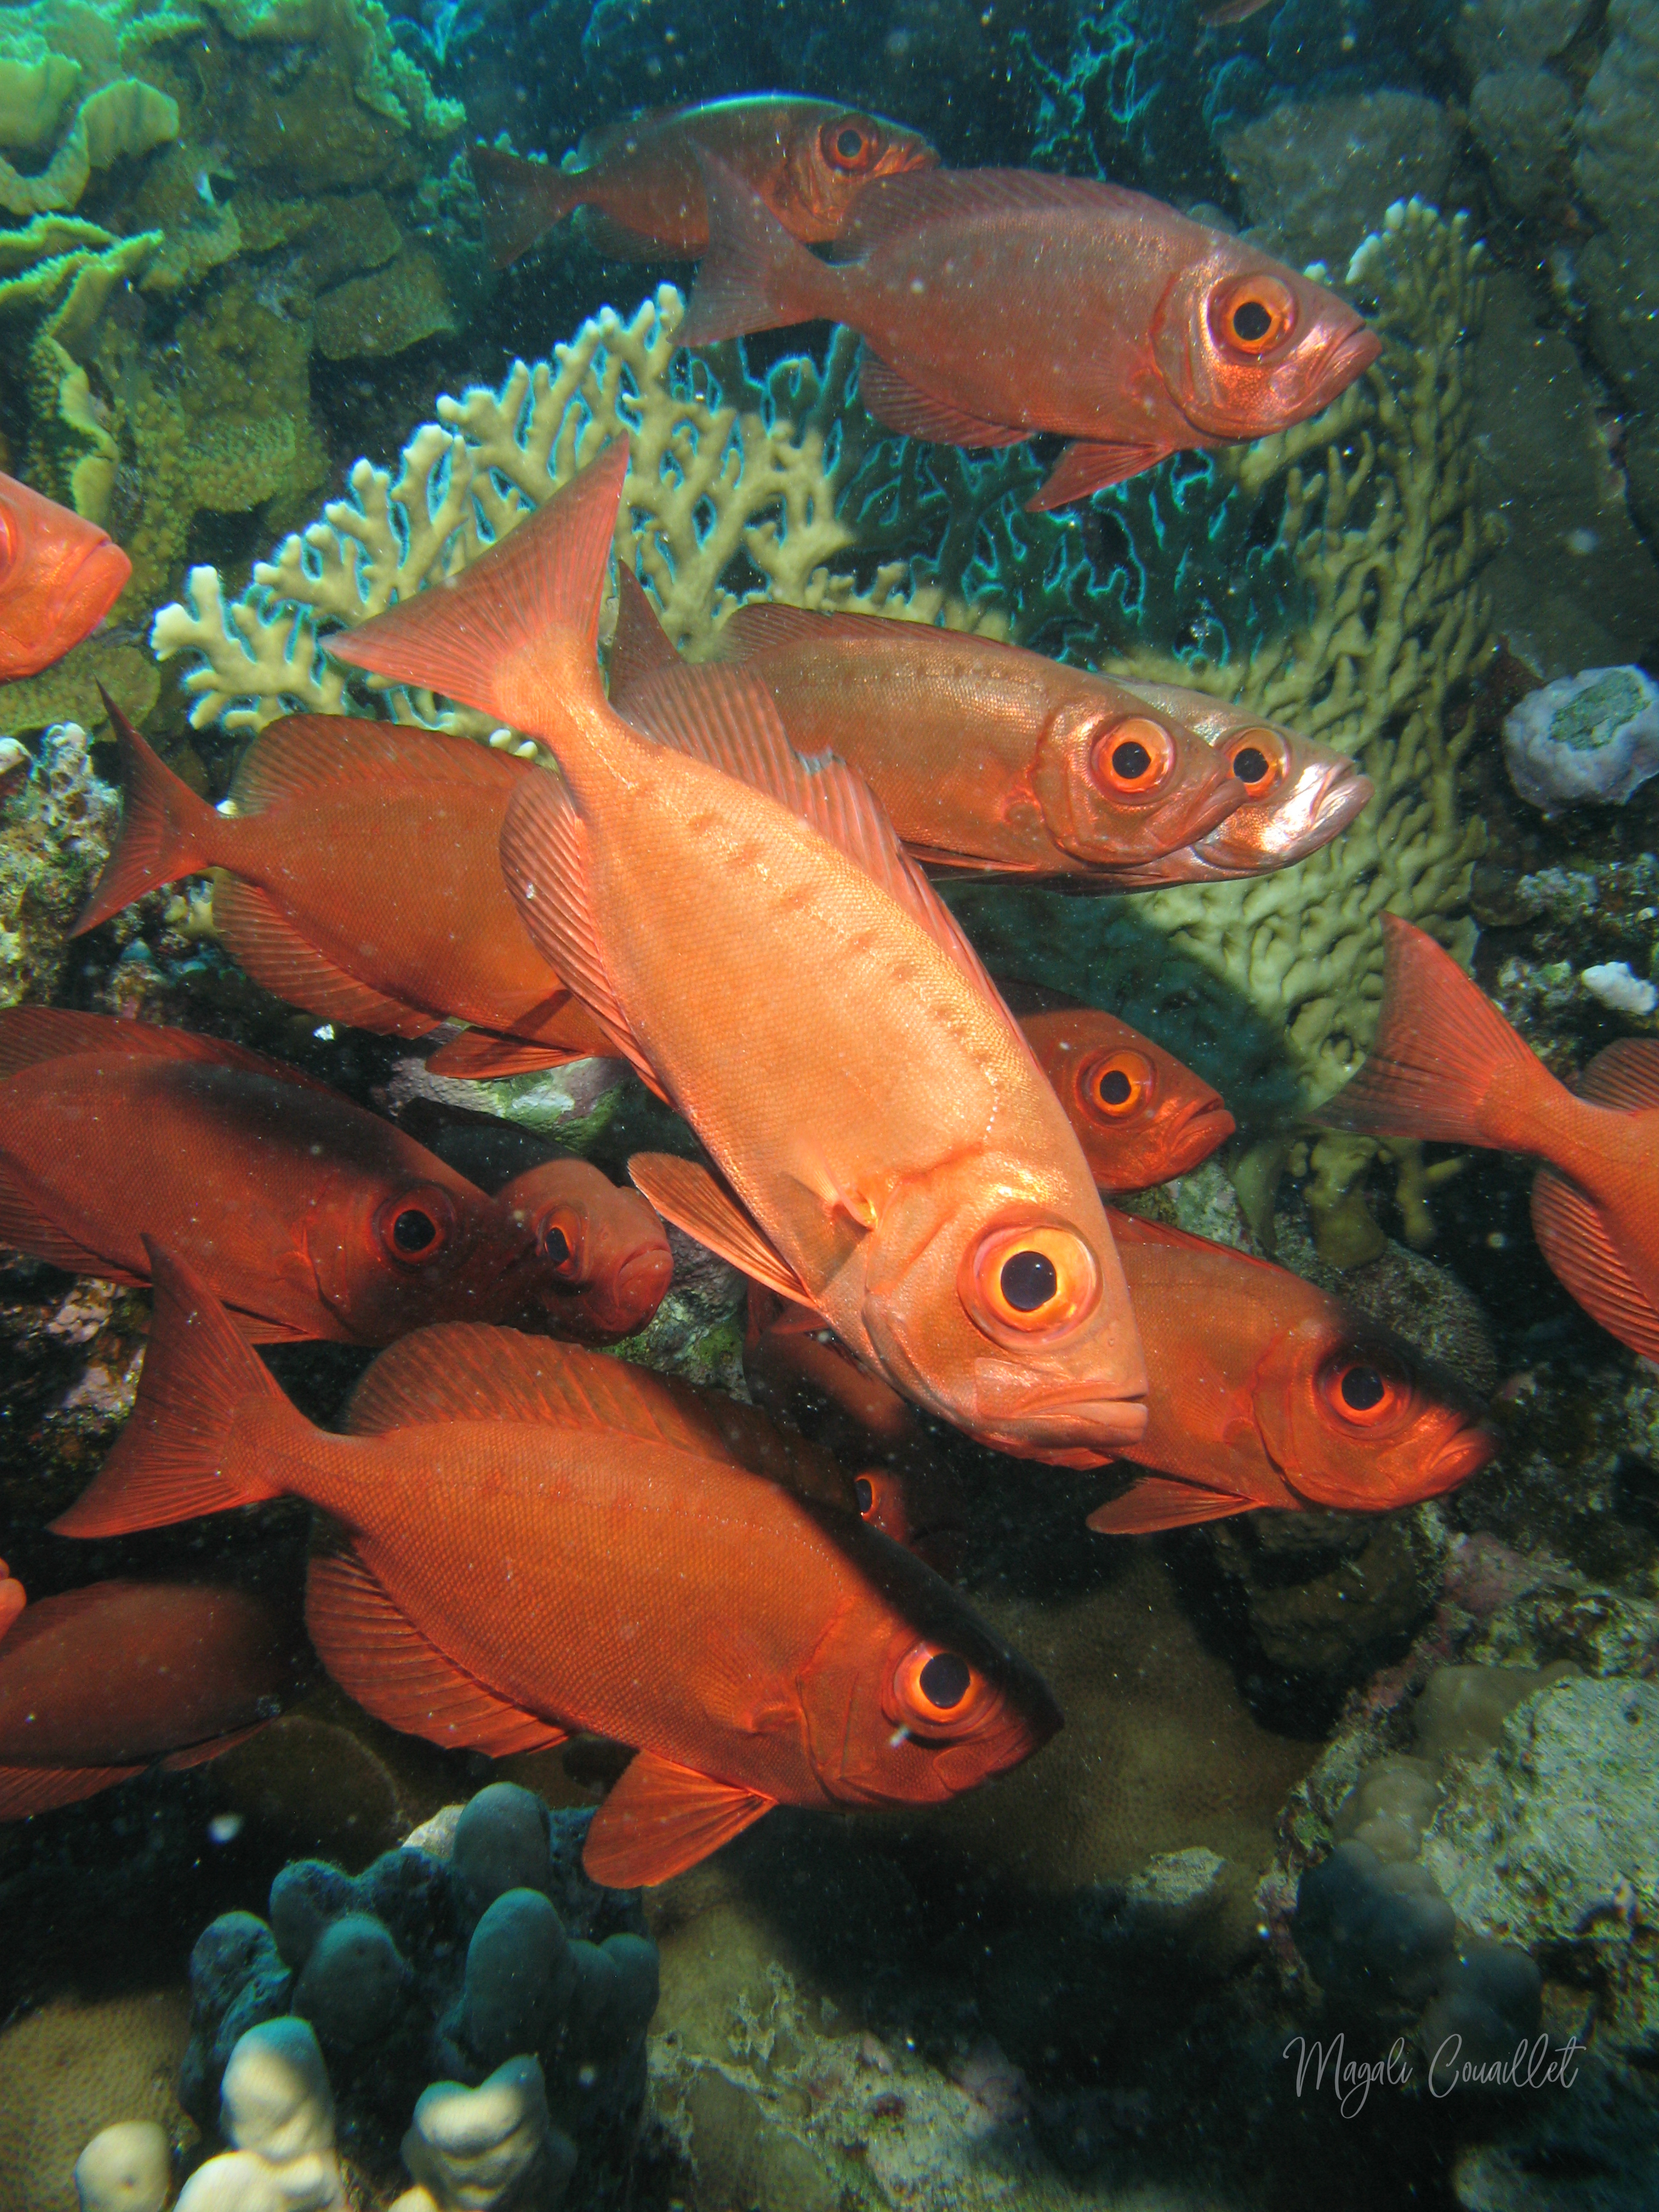 Poissons-soldats - Soldierfish